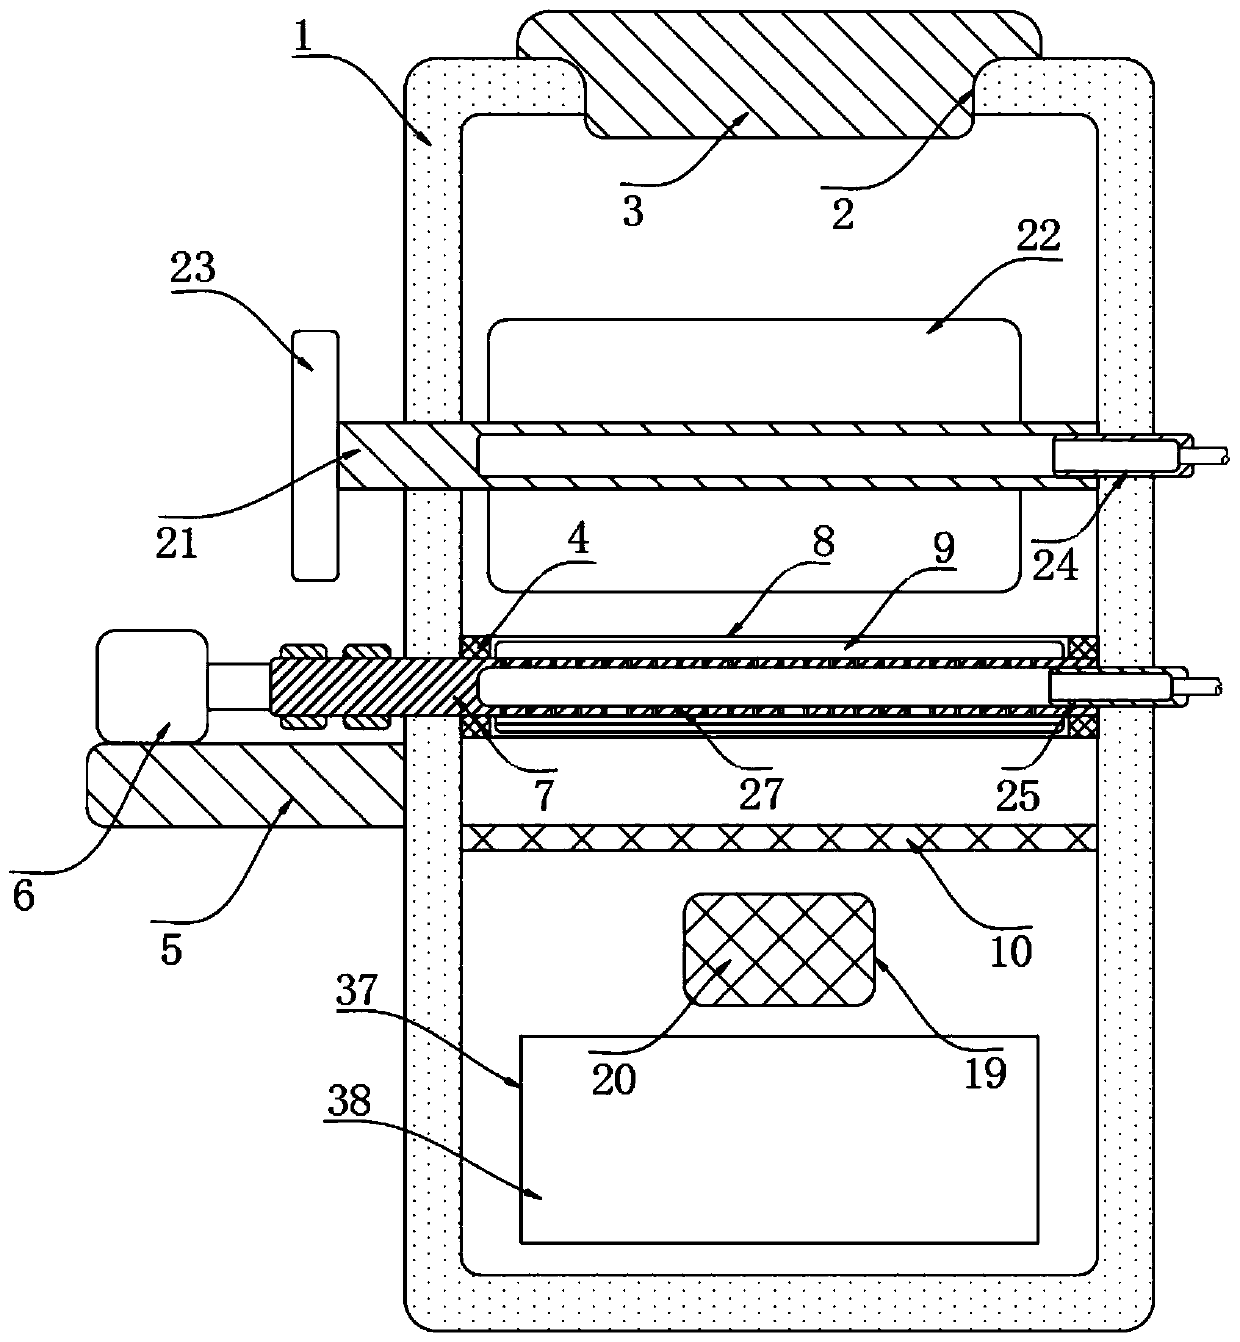 Screening device for soil remediation